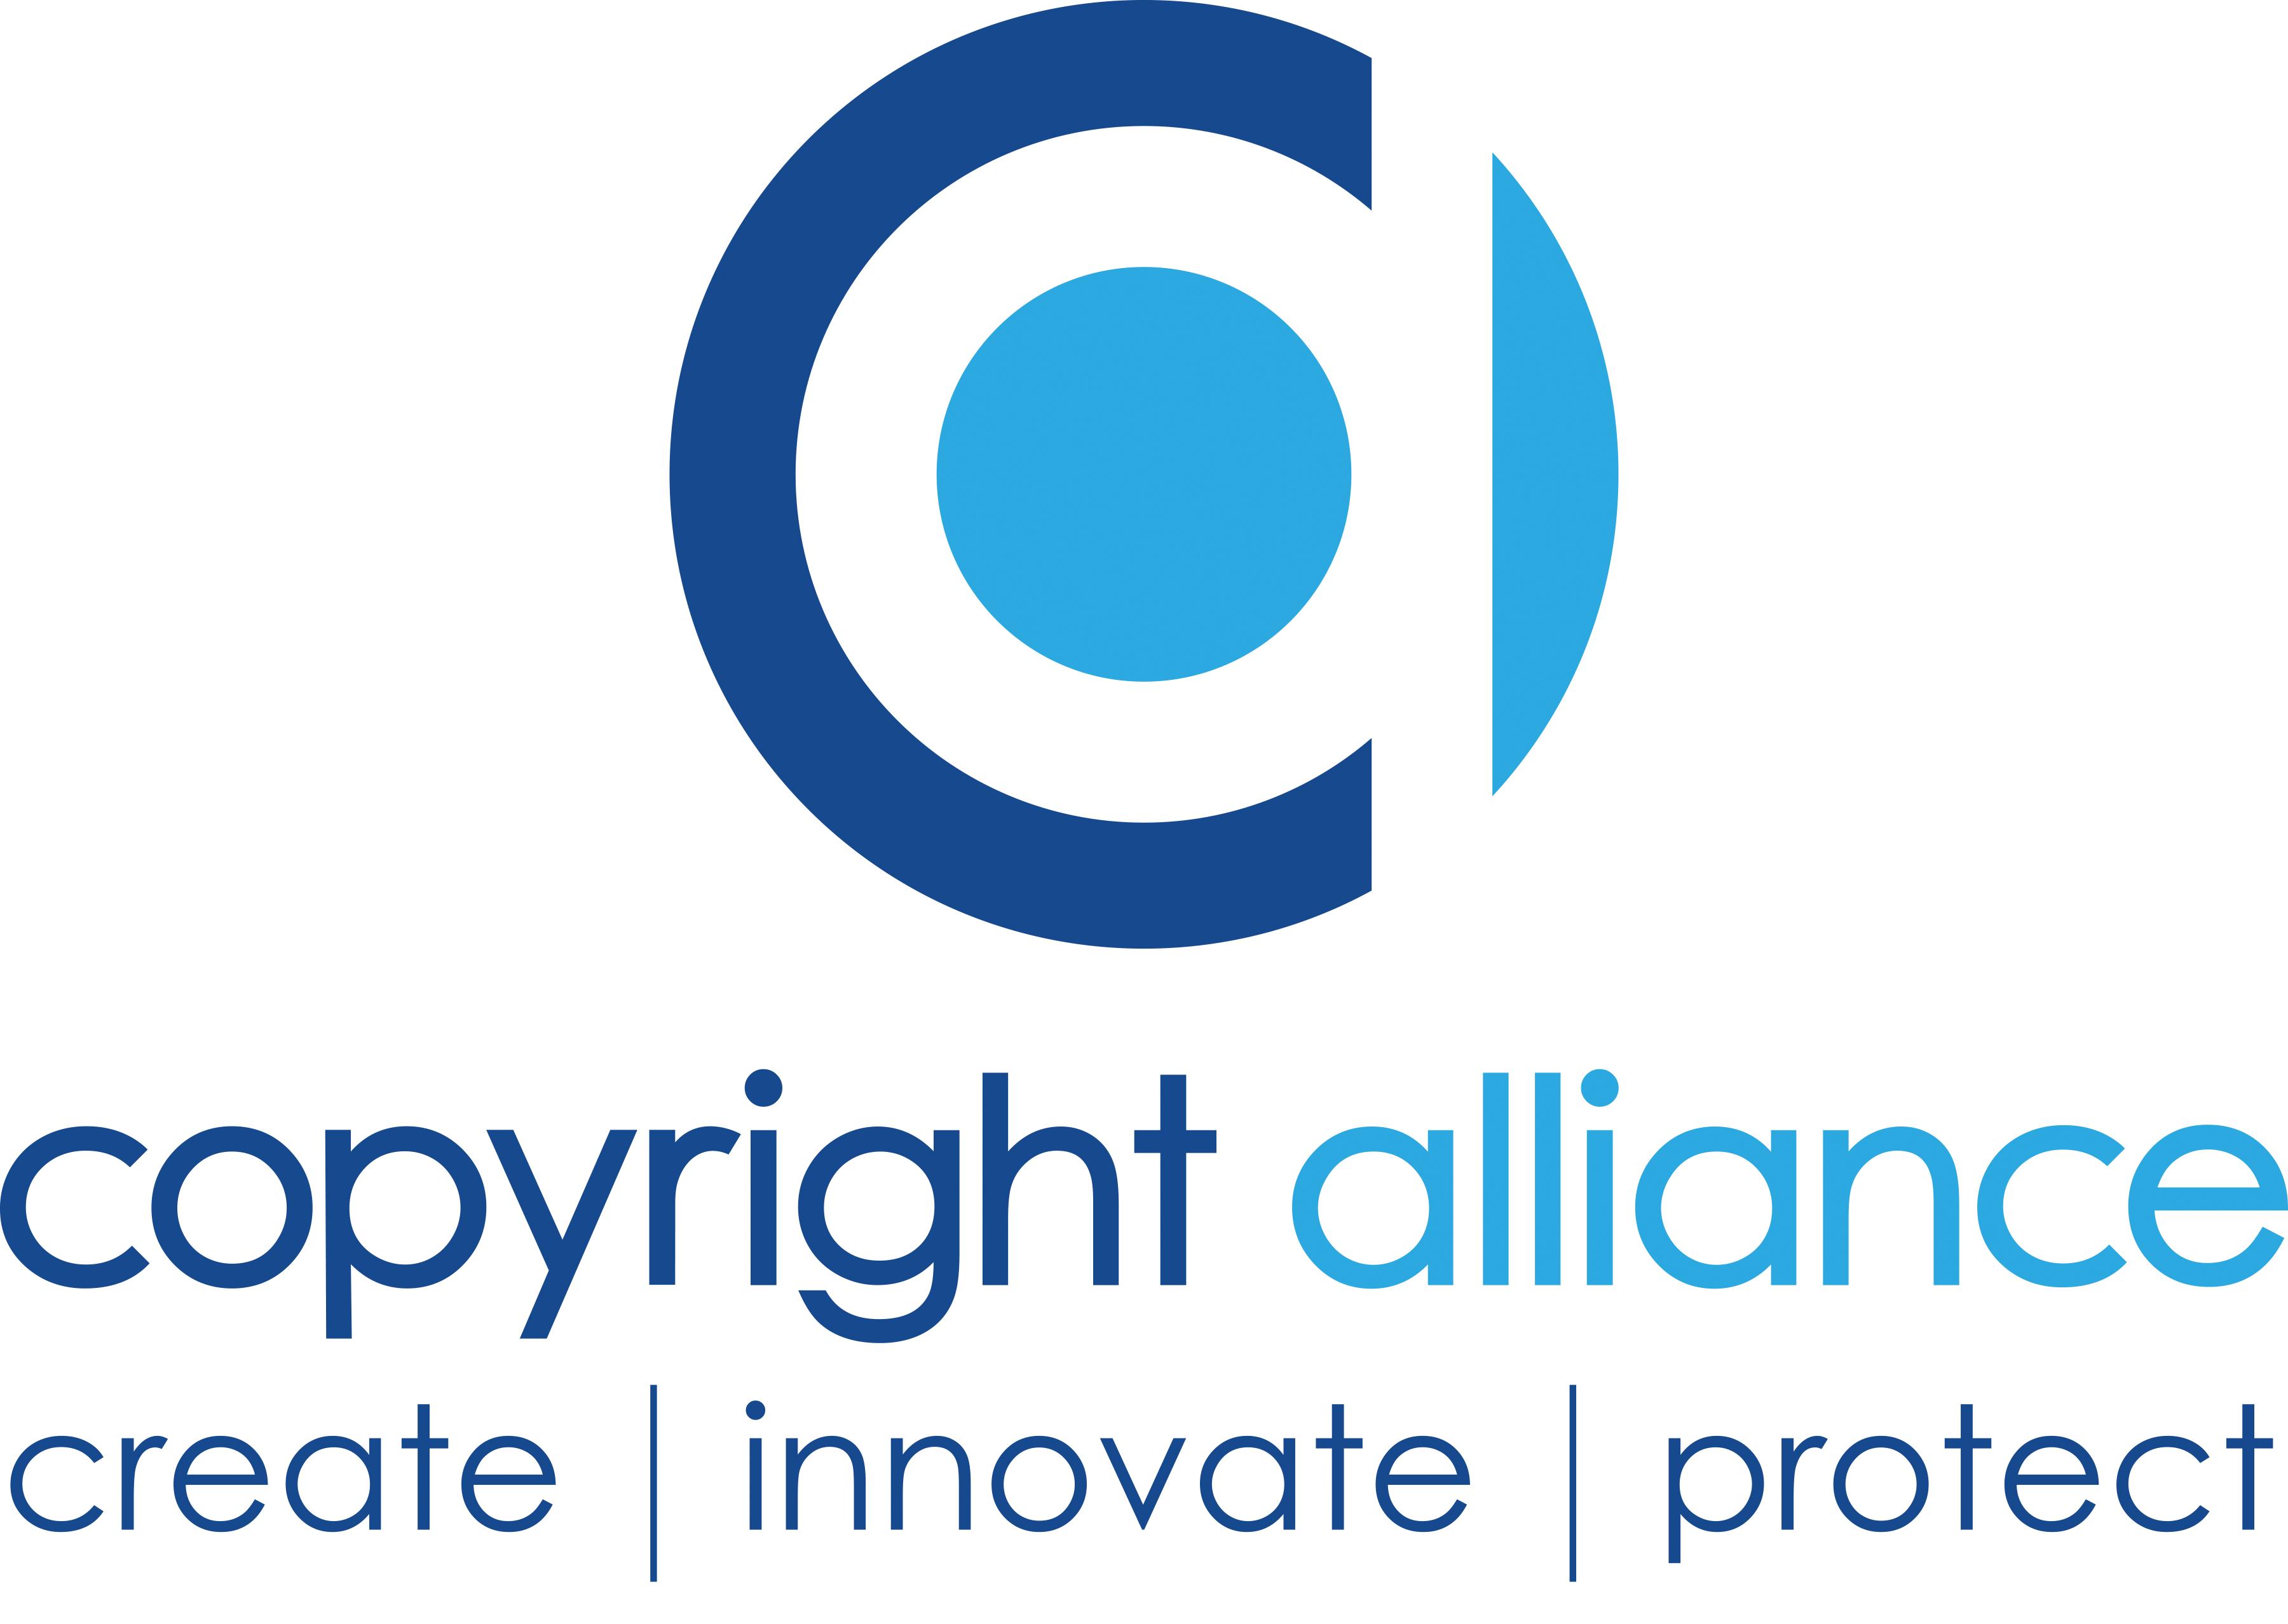 Alliance Logo - Copyright Alliance | The unified voice of the copyright community